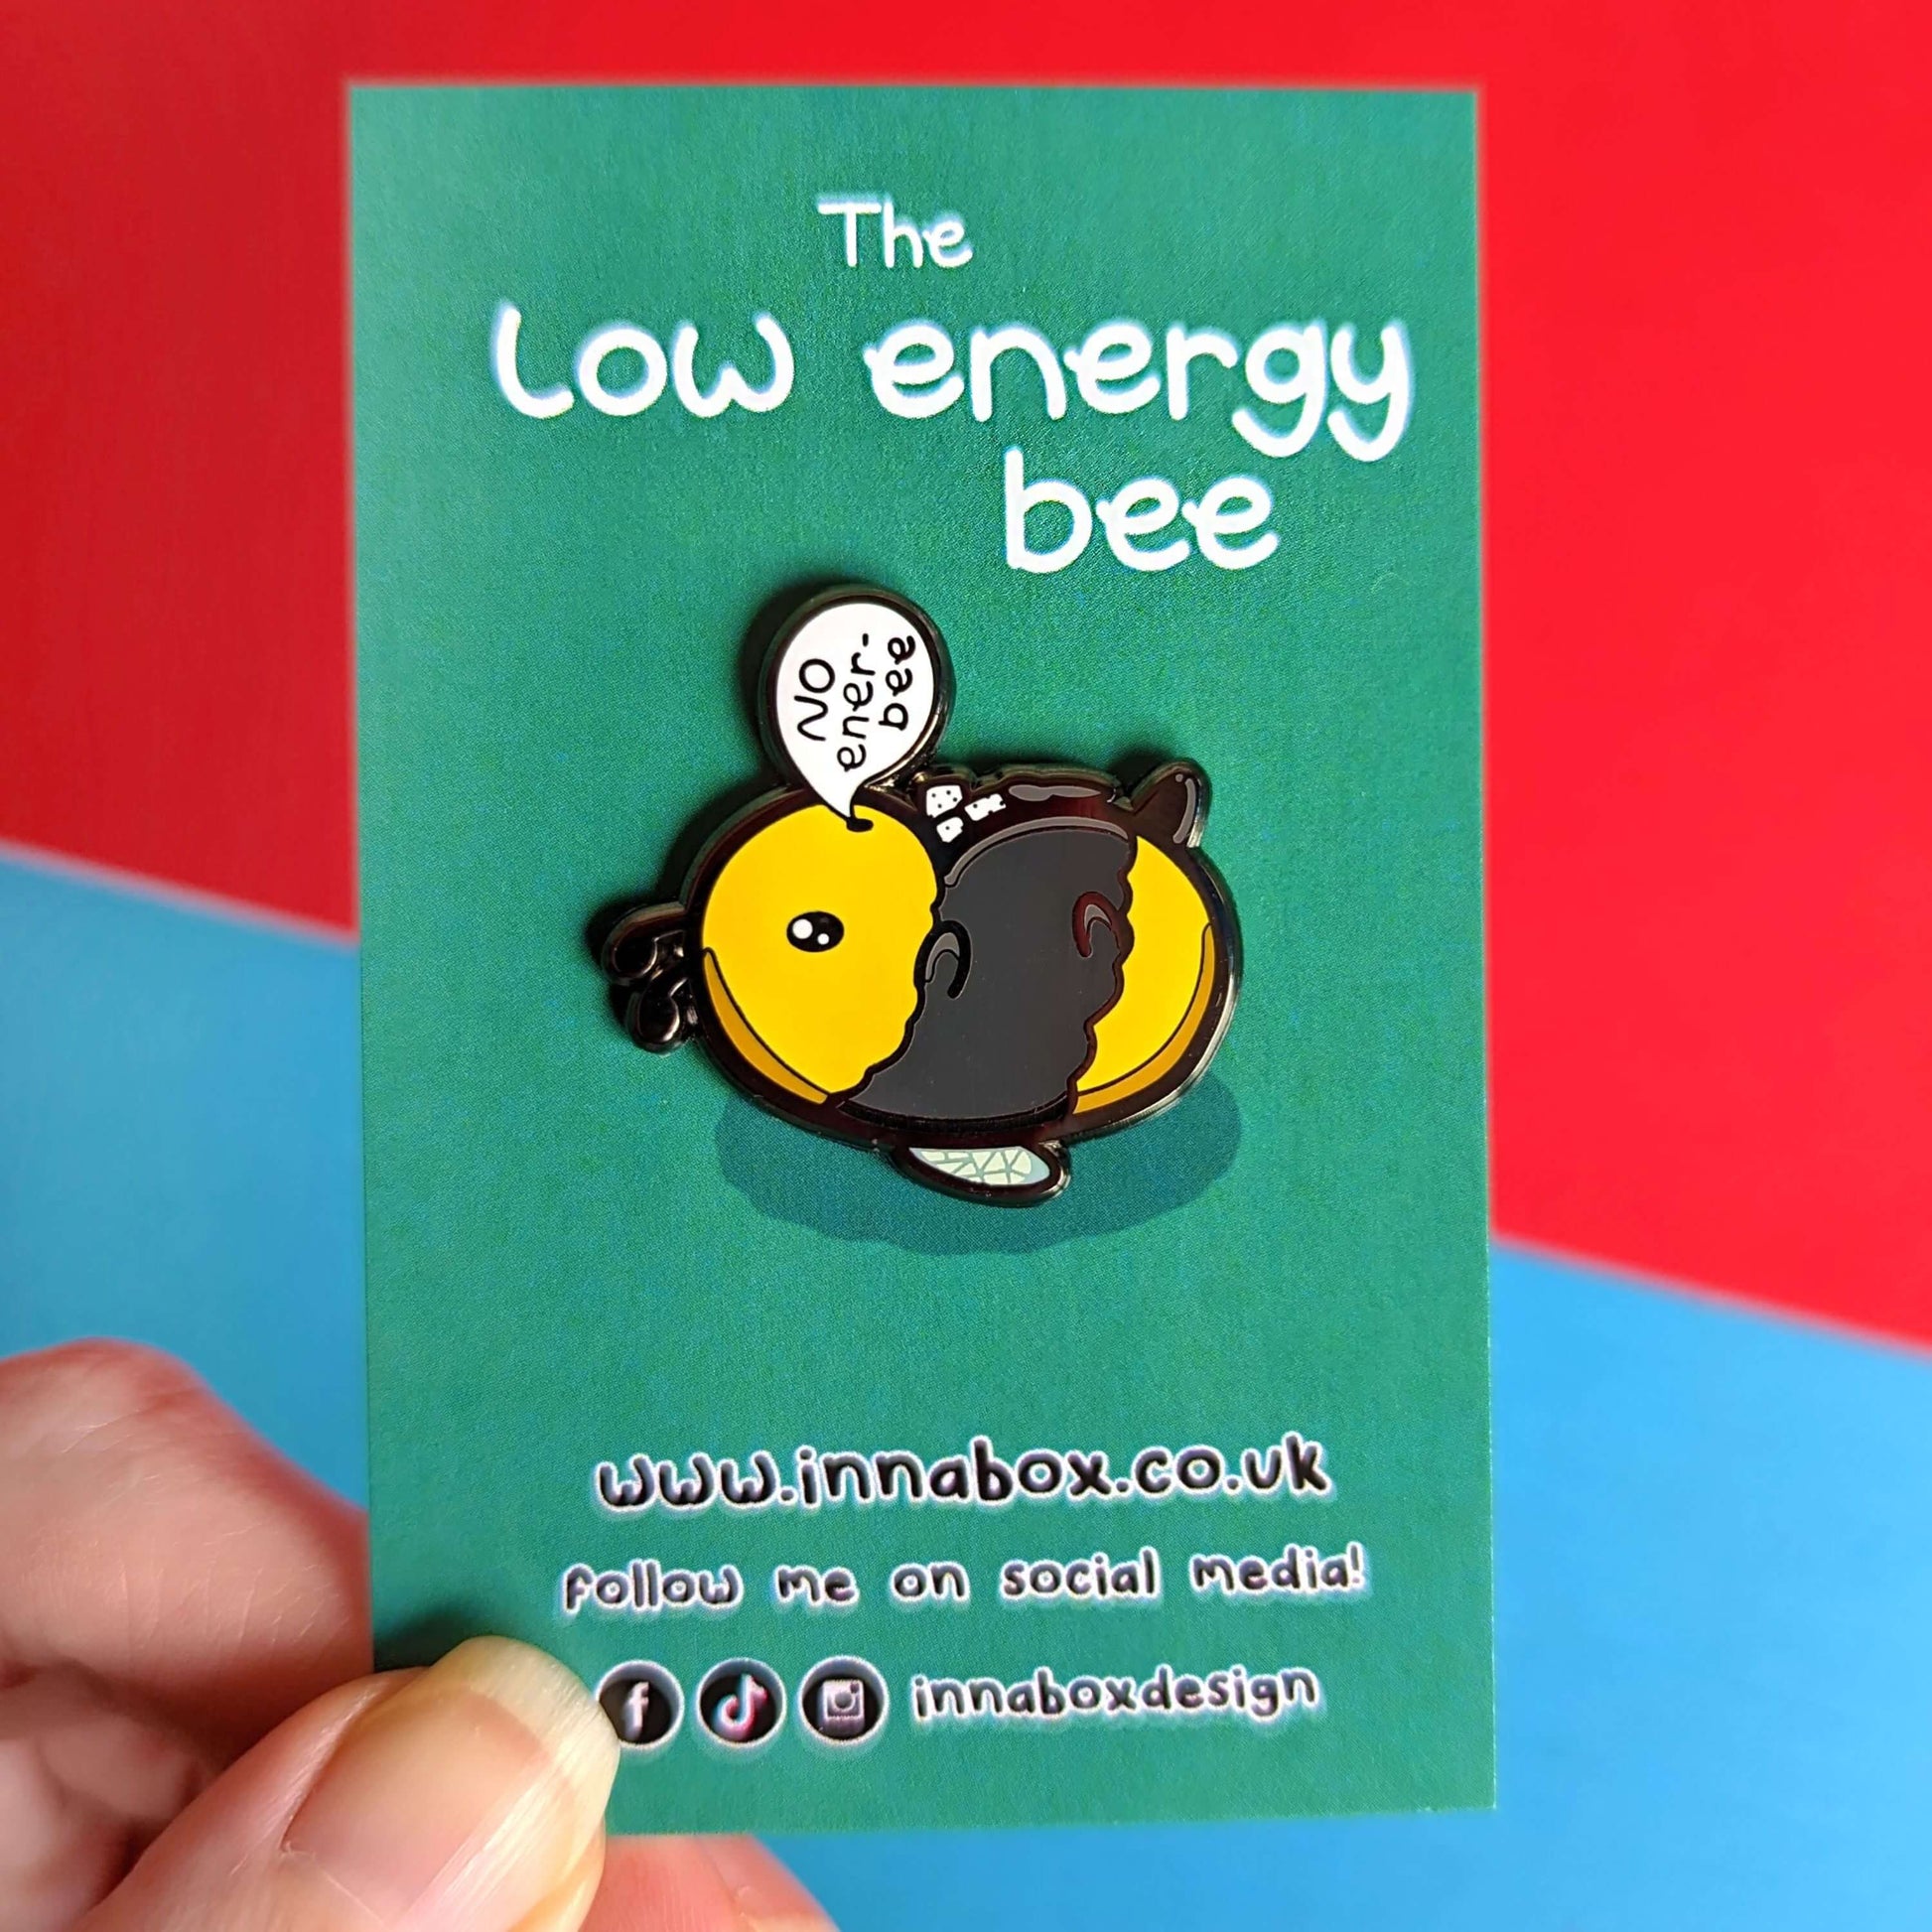 Low Energy Bee Enamel Pin on green backing held in front of a red and blue background. The enamel pin is a cute yellow and black bee lying on it's wings with its arms, legs, little belly and stinger in the air. The bee has a speech bubble coming from it's mouth with 'NO ener-bee' written inside in black writing. Hand drawn design made to raise awareness for chronic fatigue.